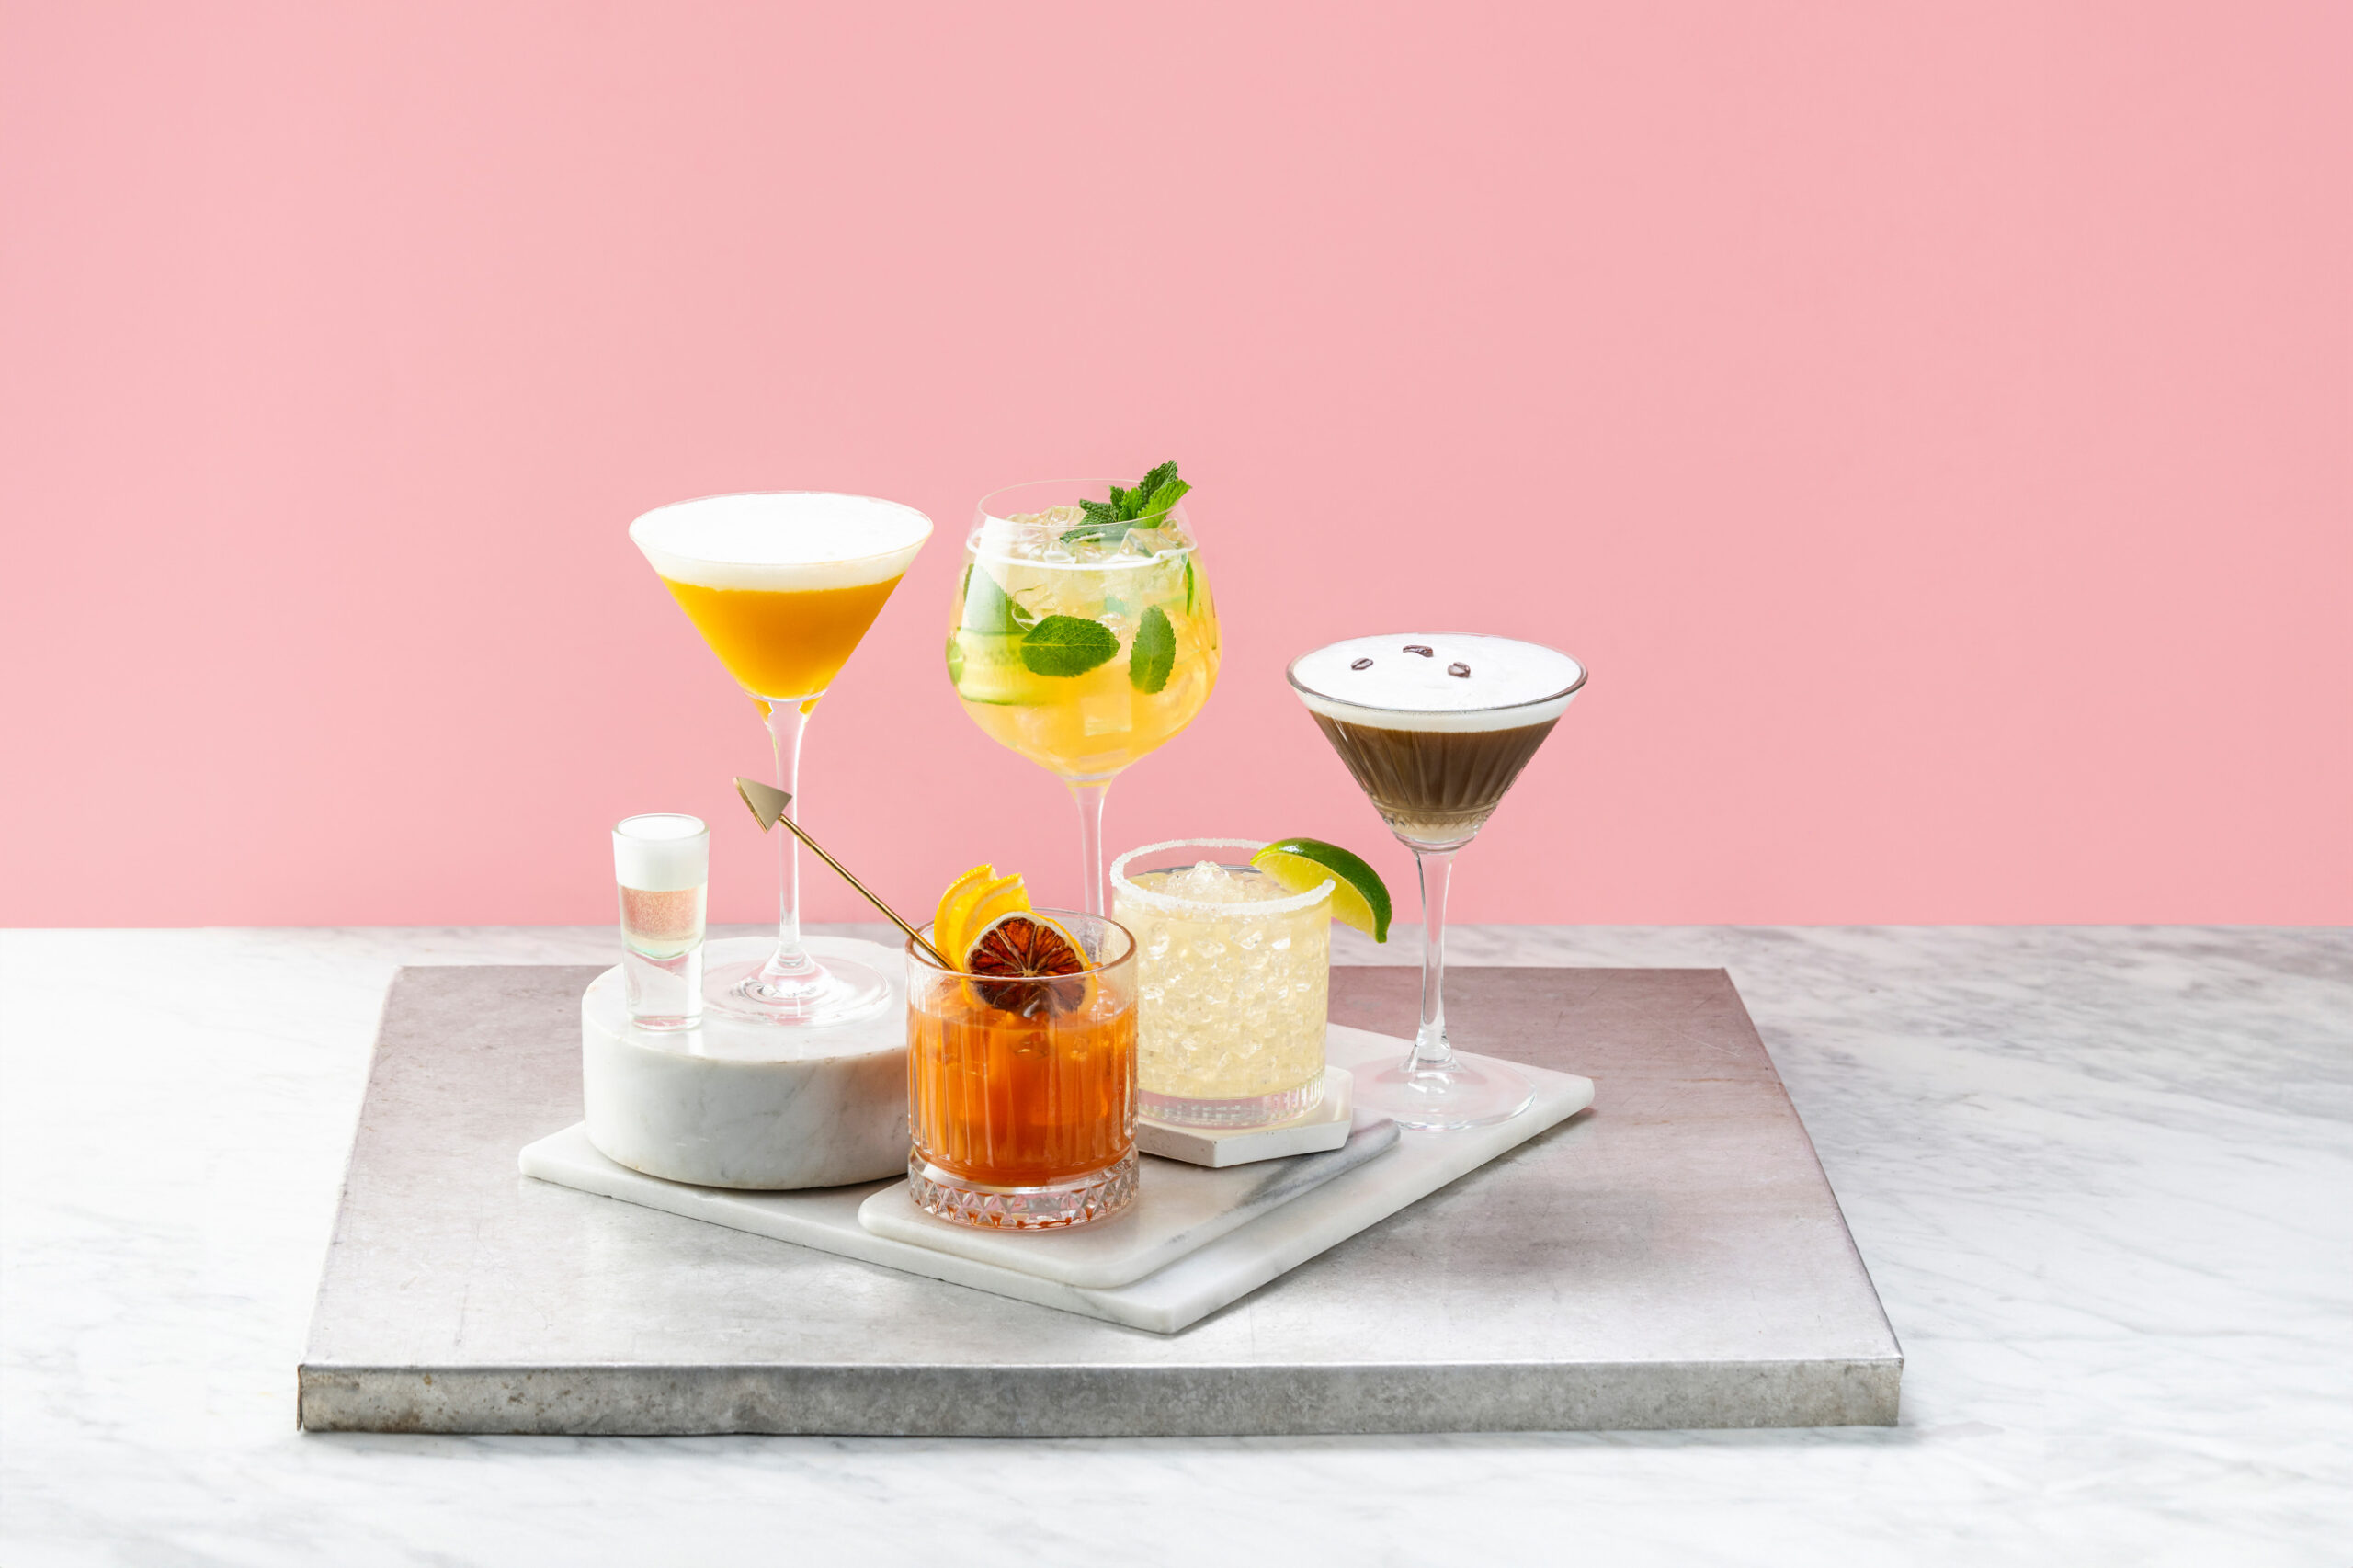 https://www.drakeandmorgan.co.uk/the-anthologist/wp-content/uploads/2020/07/Cocktail-Grp-002-scaled.jpg